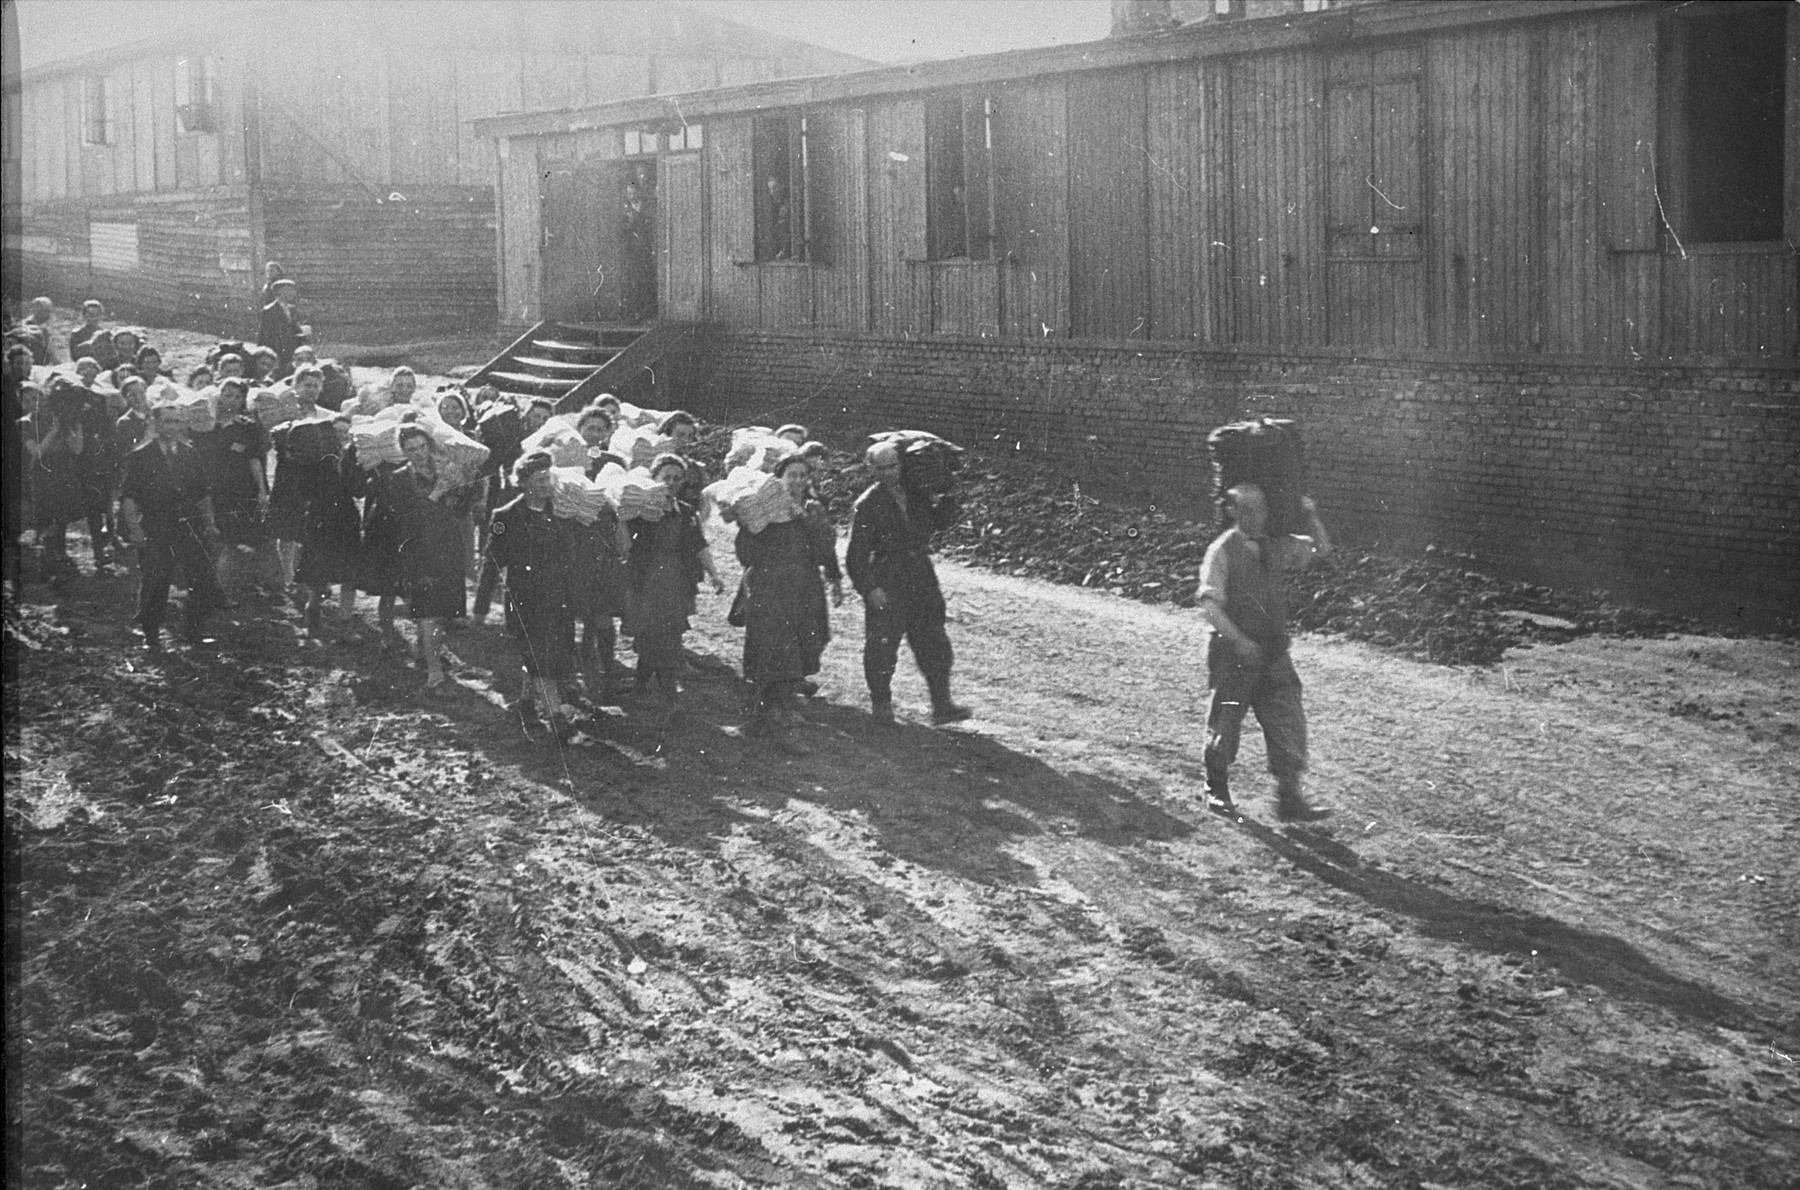 Jewish prisoners carry cloth to the Madritch factory.  The Madritch factory utilized concentration camp labor to produce uniforms for the German army.